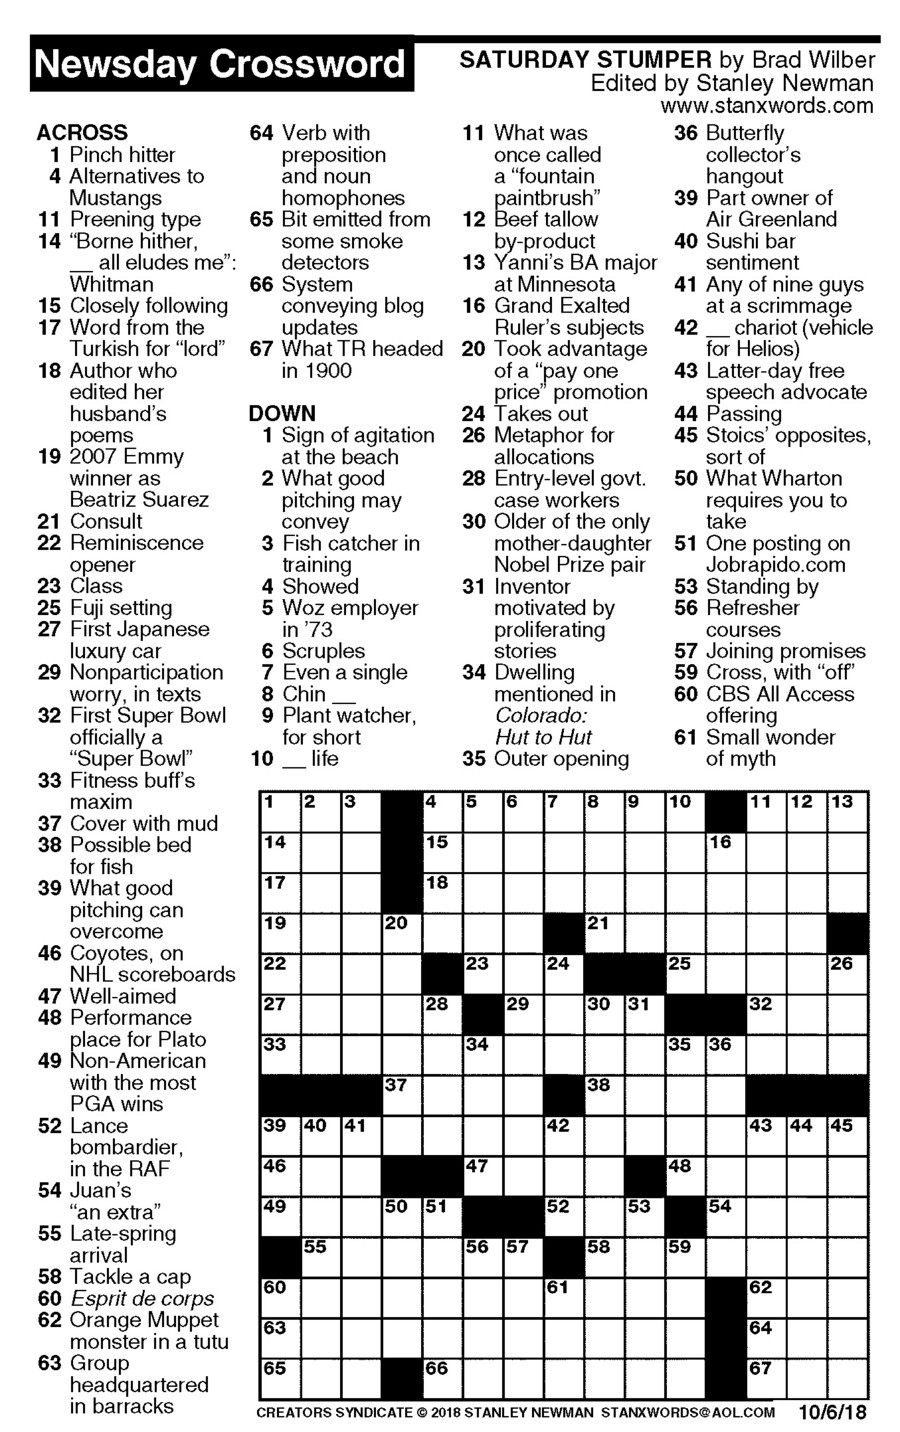 Newsday Crossword Puzzle For Oct 06, 2018,stanley Newman - Printable Crossword Puzzles Newsday